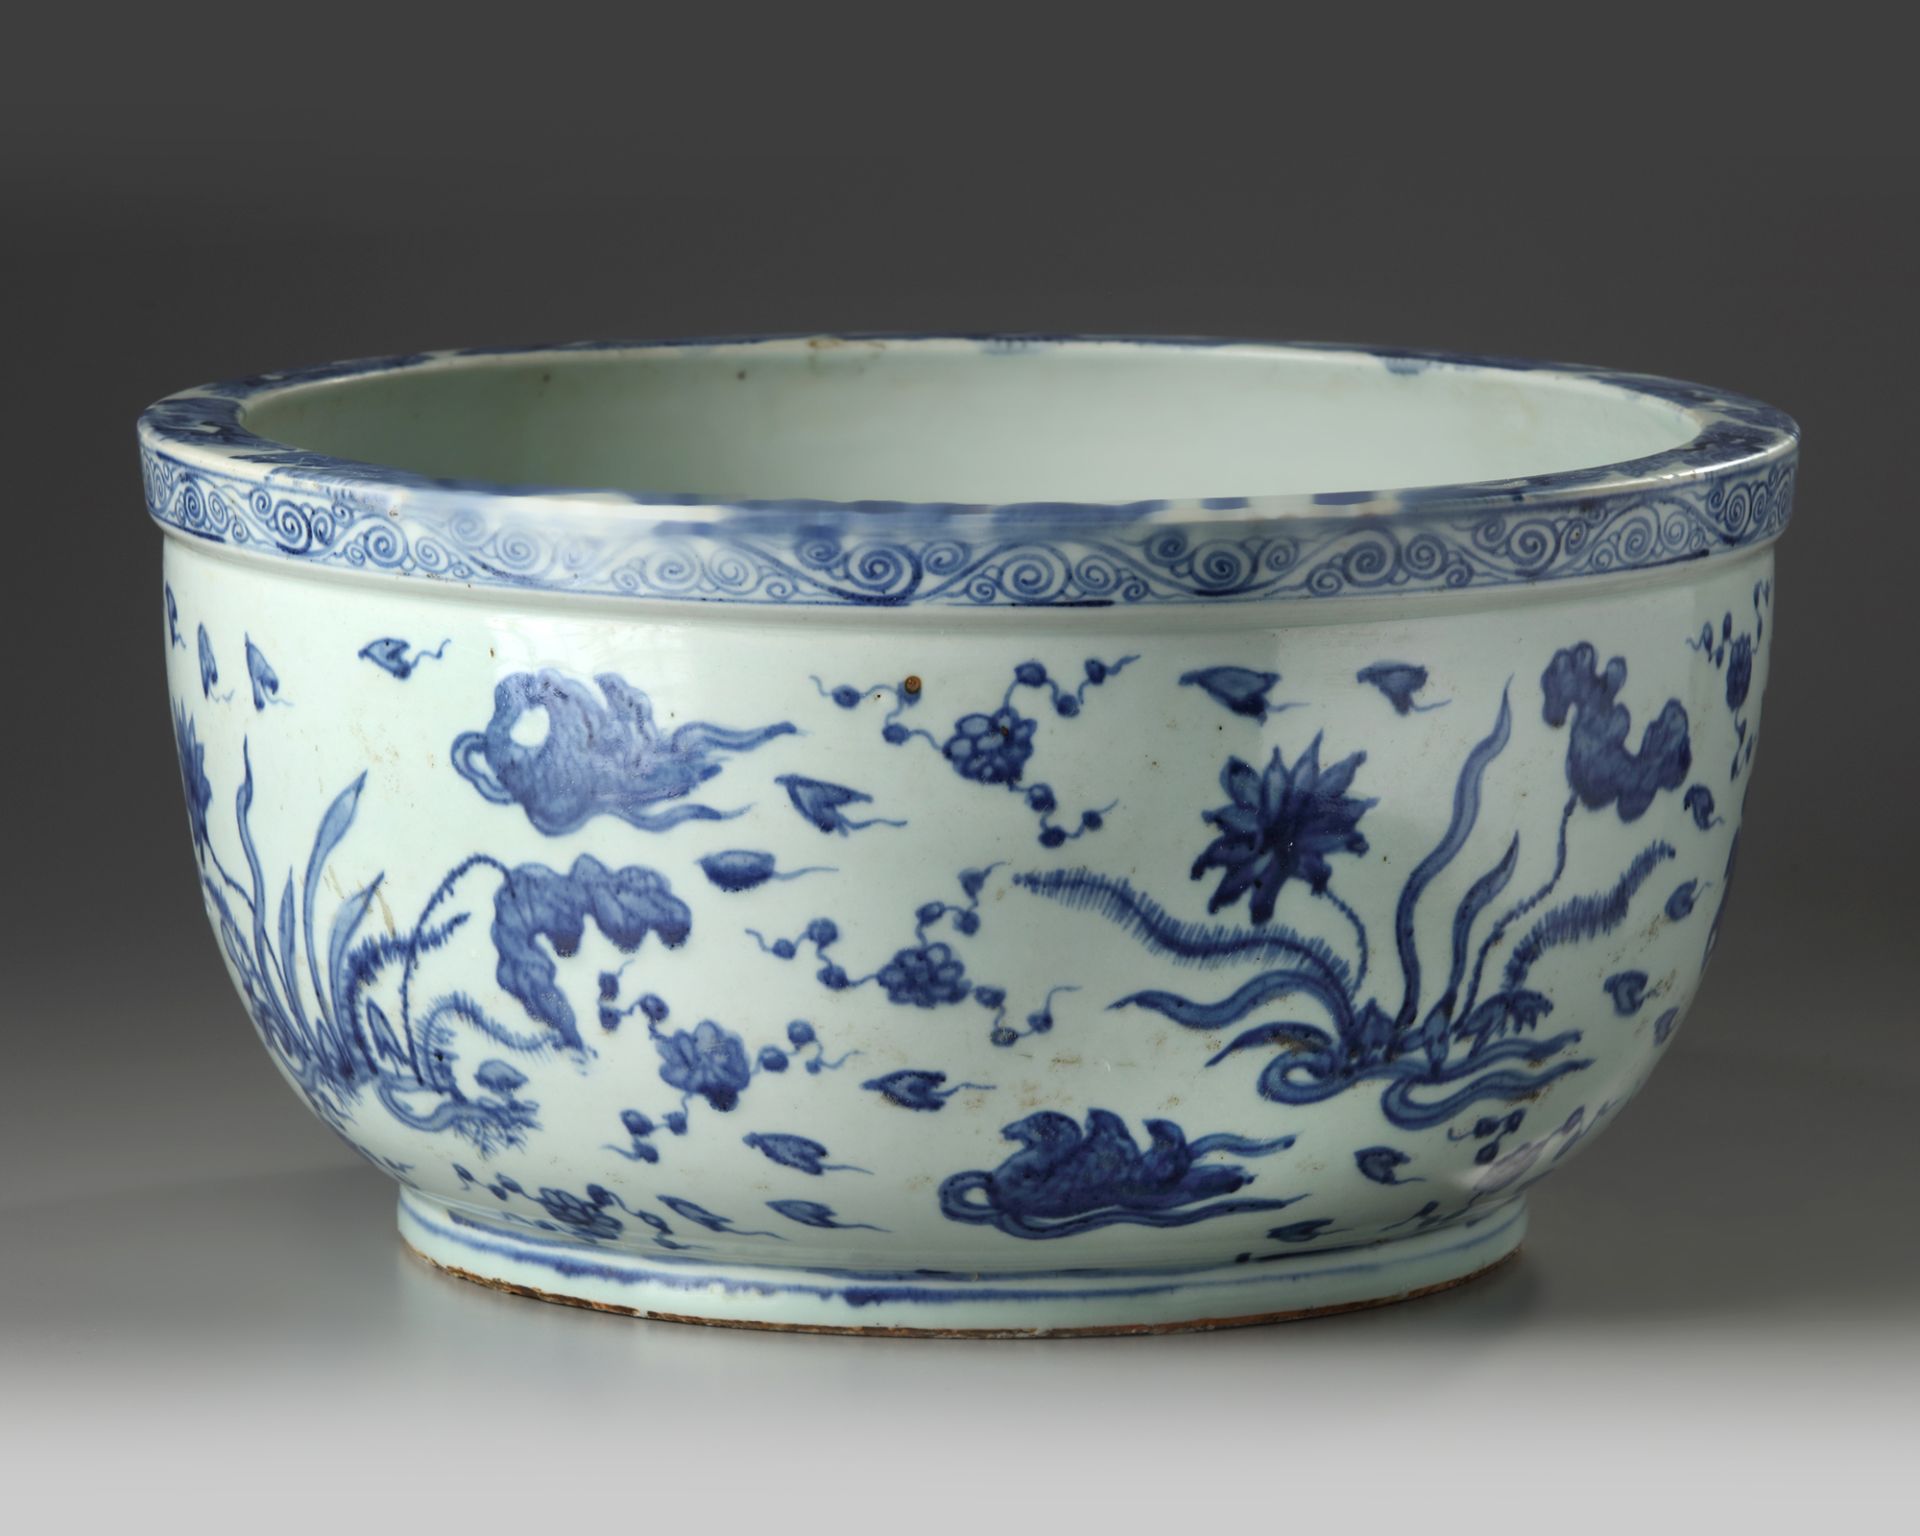 A CHINESE BLUE AND WHITE DUCKS AND LOTUS' BASIN, MING DYNASTY (1368-1644) - Image 3 of 6